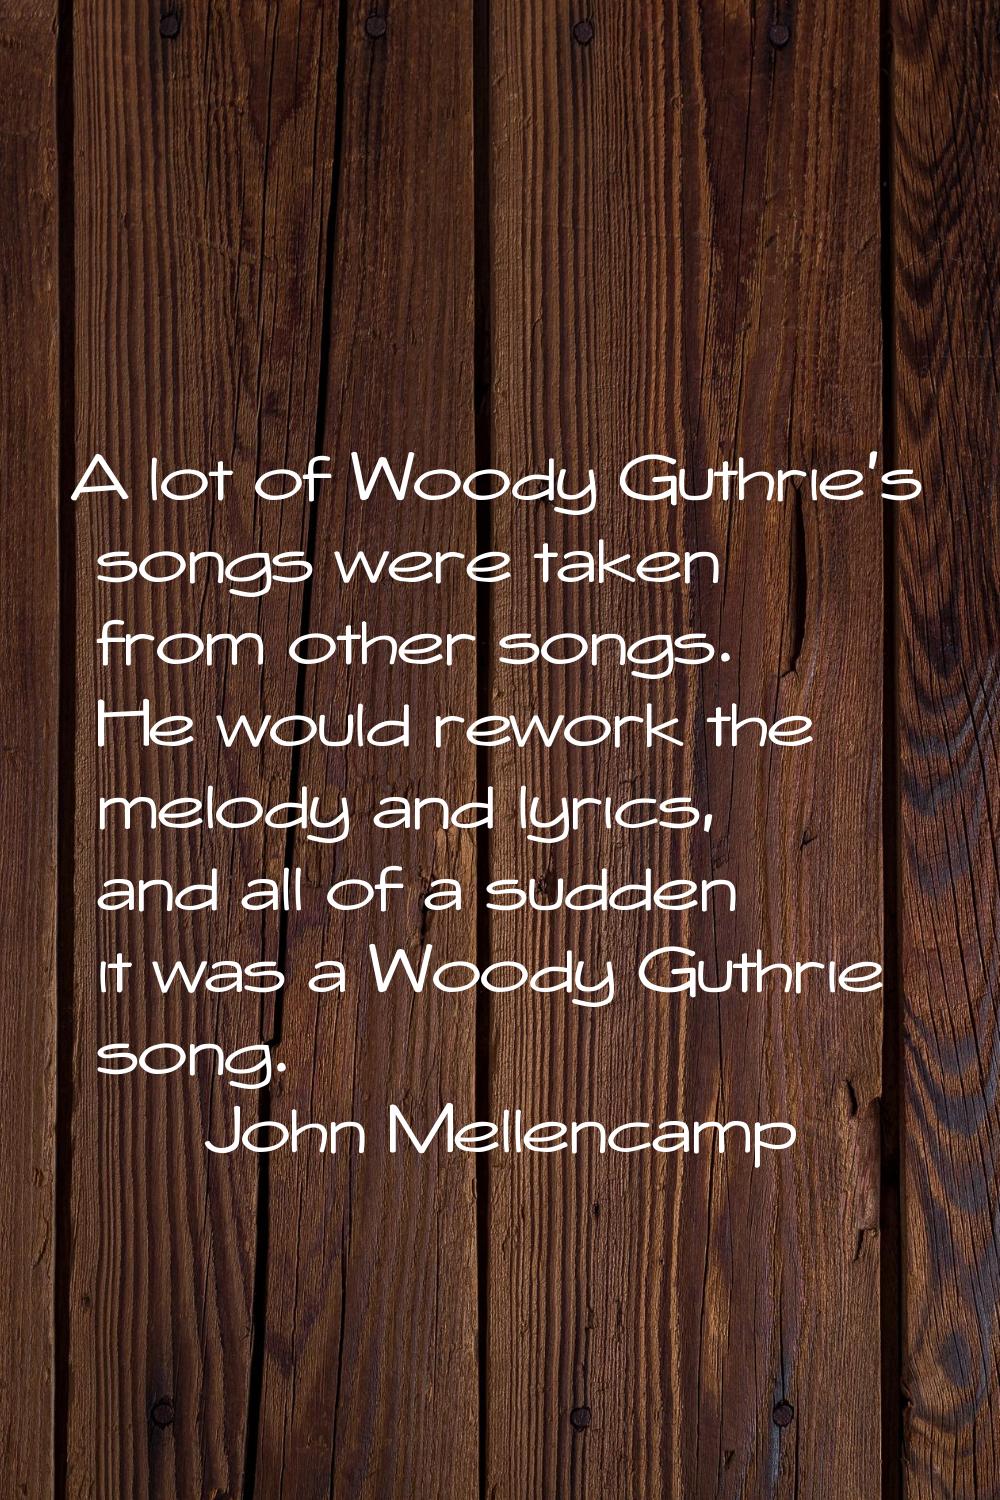 A lot of Woody Guthrie's songs were taken from other songs. He would rework the melody and lyrics, 